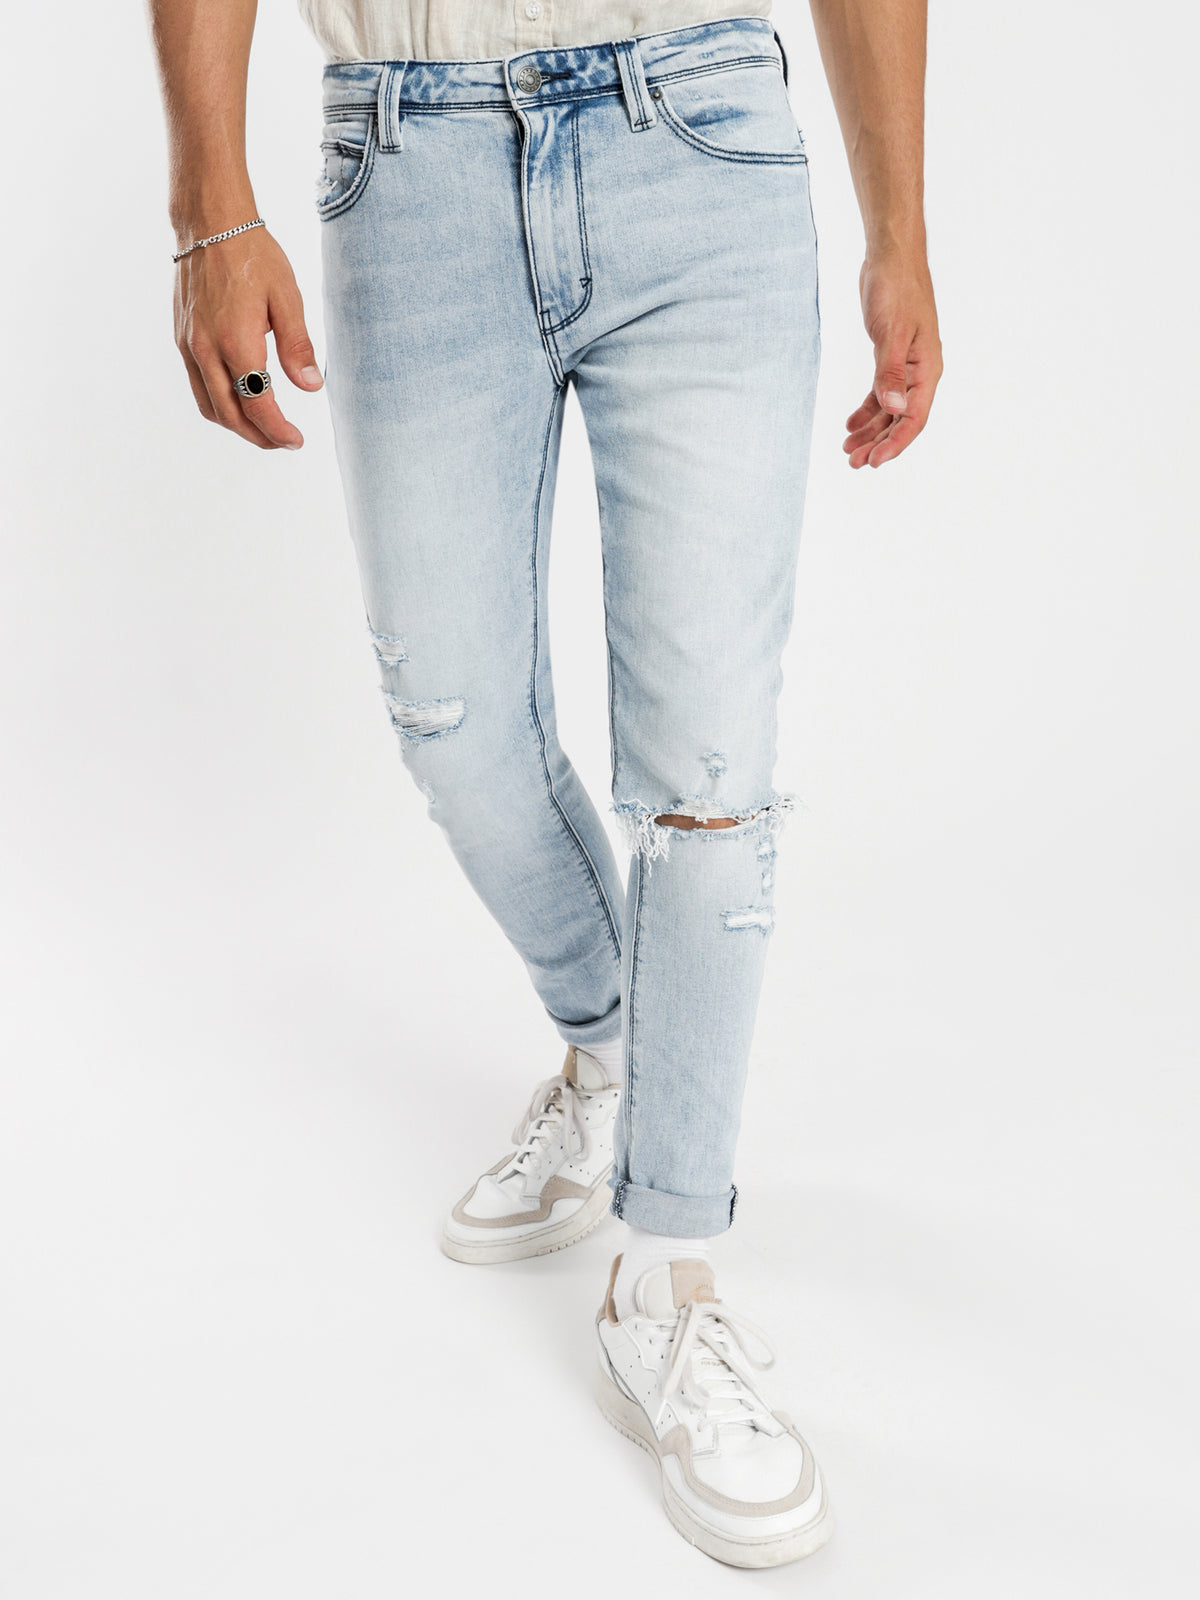 A Dropped Slim Turn Up Jeans Get Shaky Blue Denim